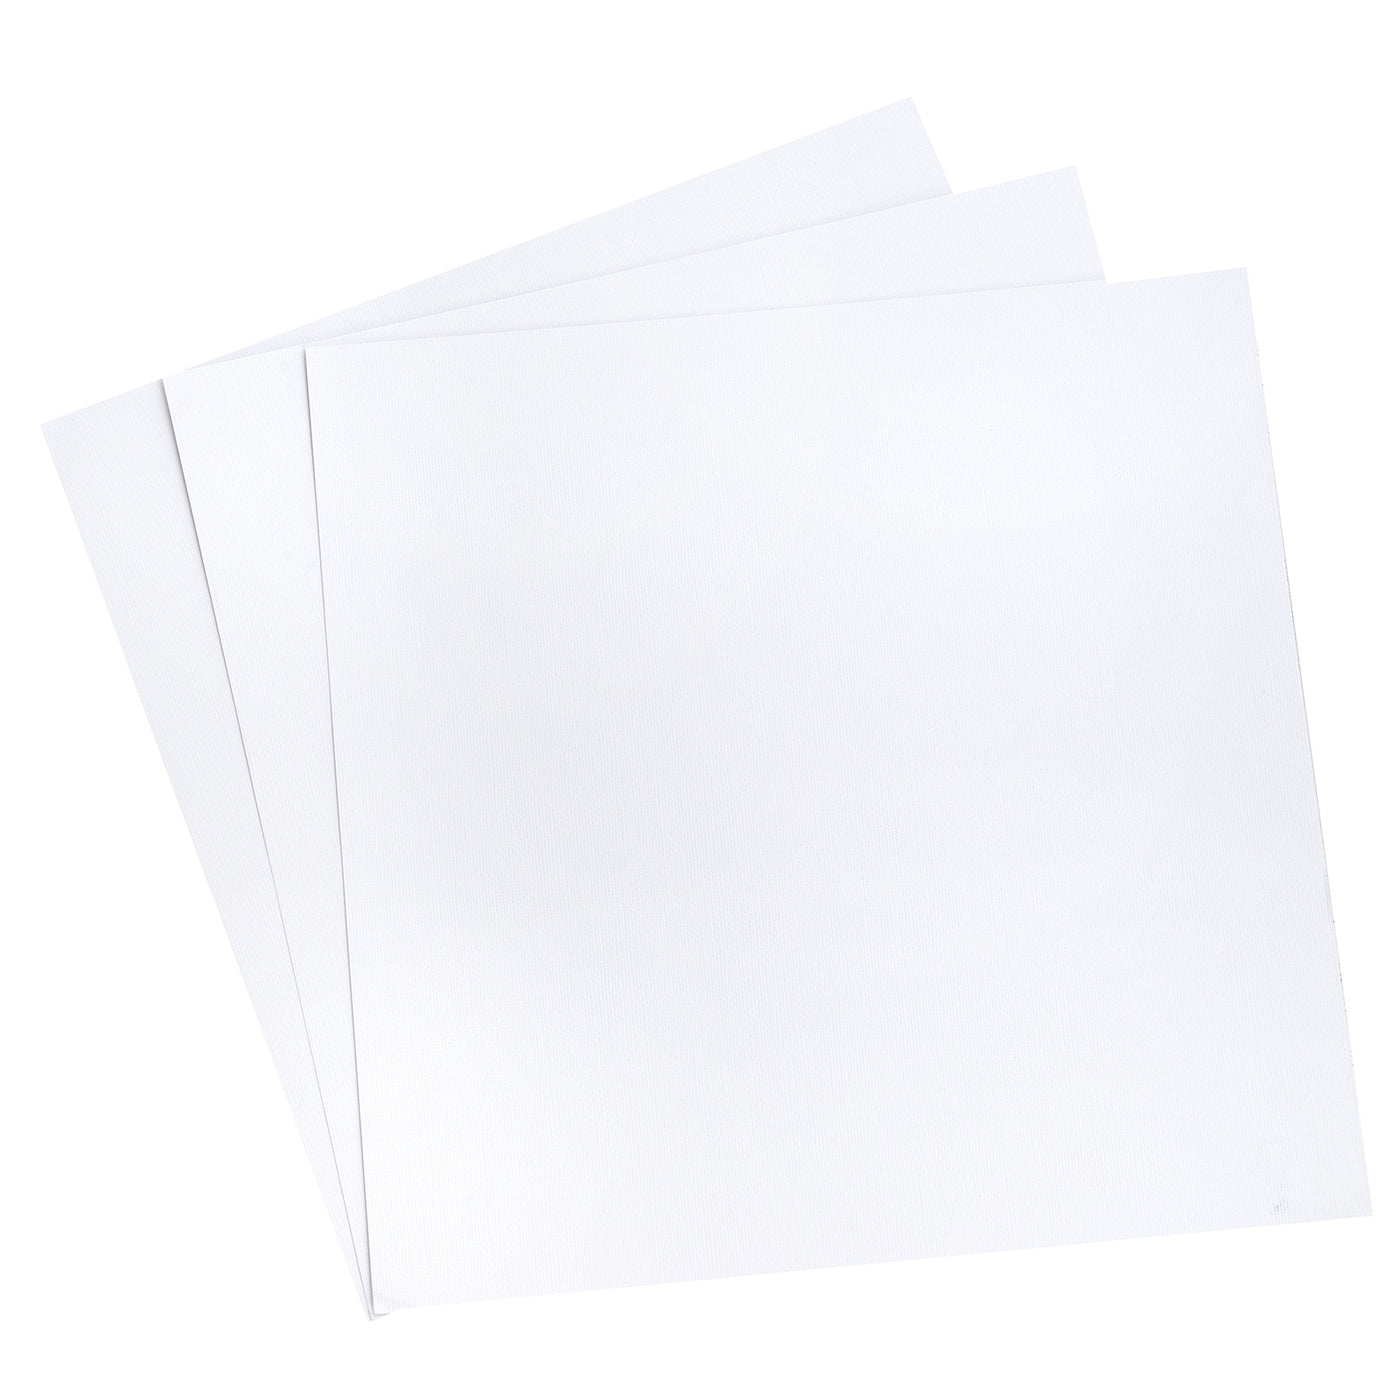 Acid Free Paper 12x12 Unpunched White (100 Pack)